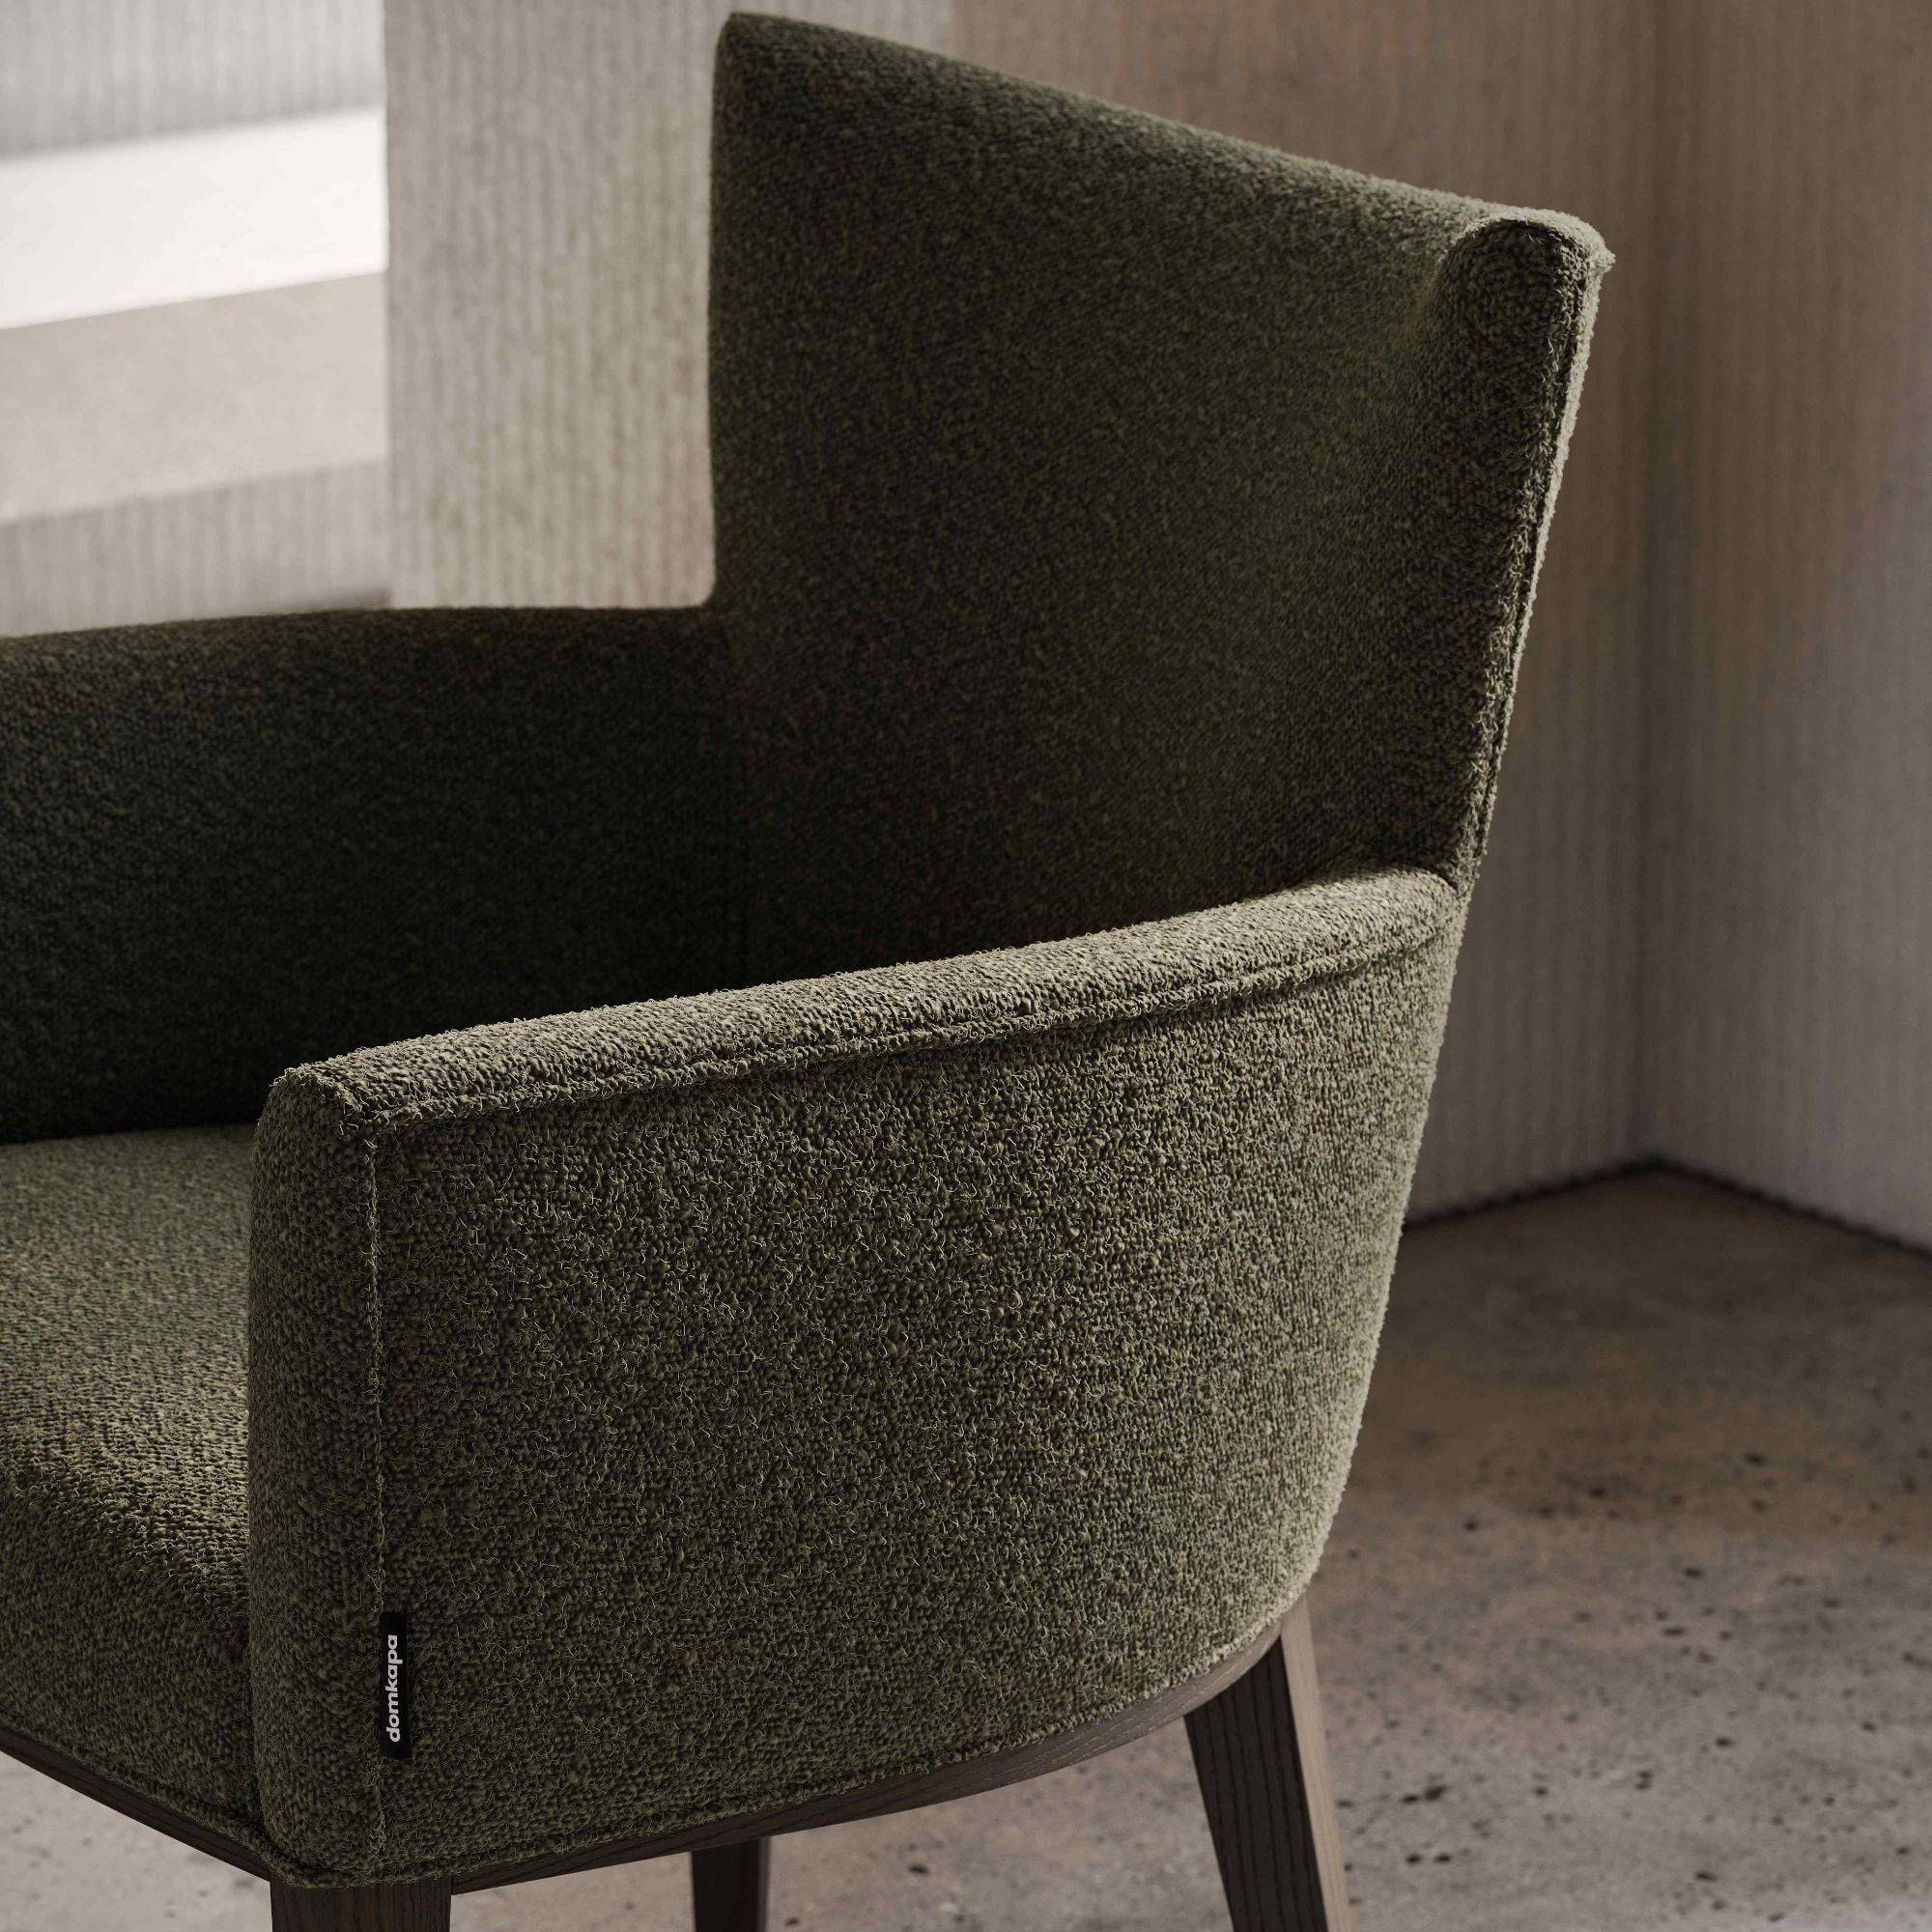 Vianna Chair With Armrest - THAT COOL LIVING